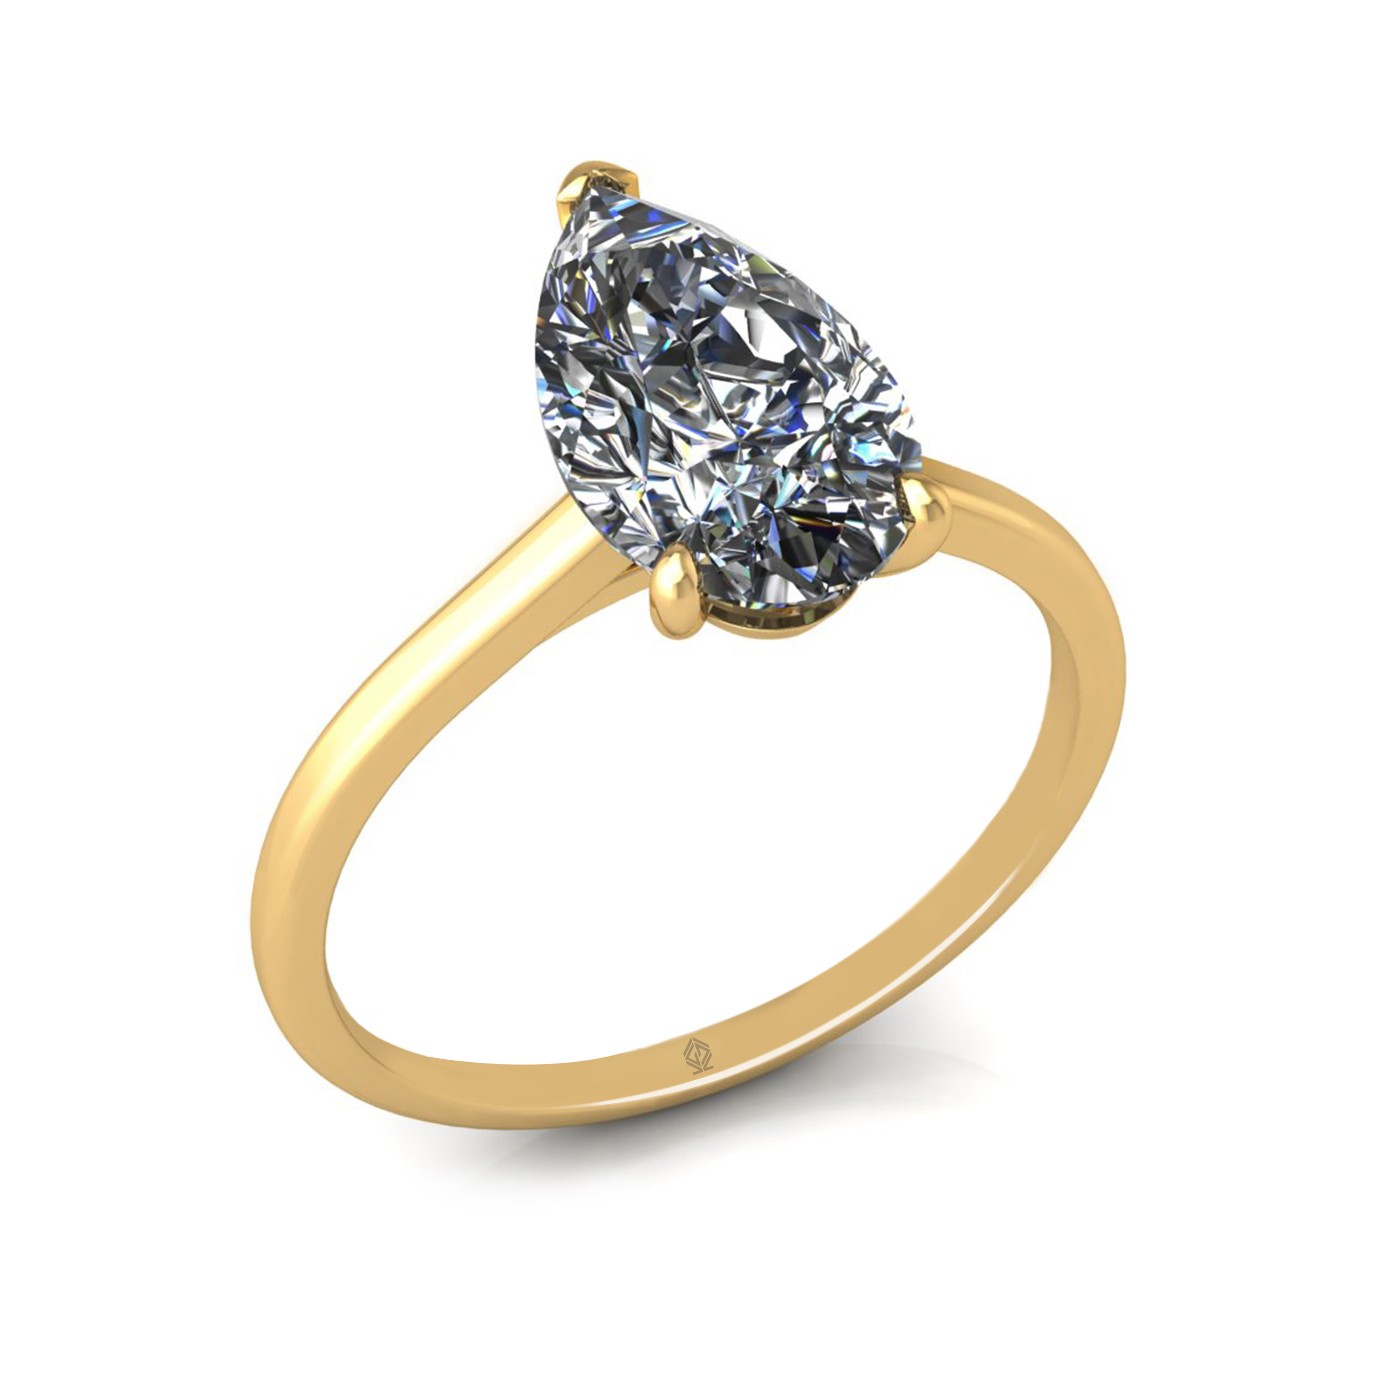 18k yellow gold  2,00 ct 3 prongs solitaire pear cut diamond engagement ring with whisper thin band